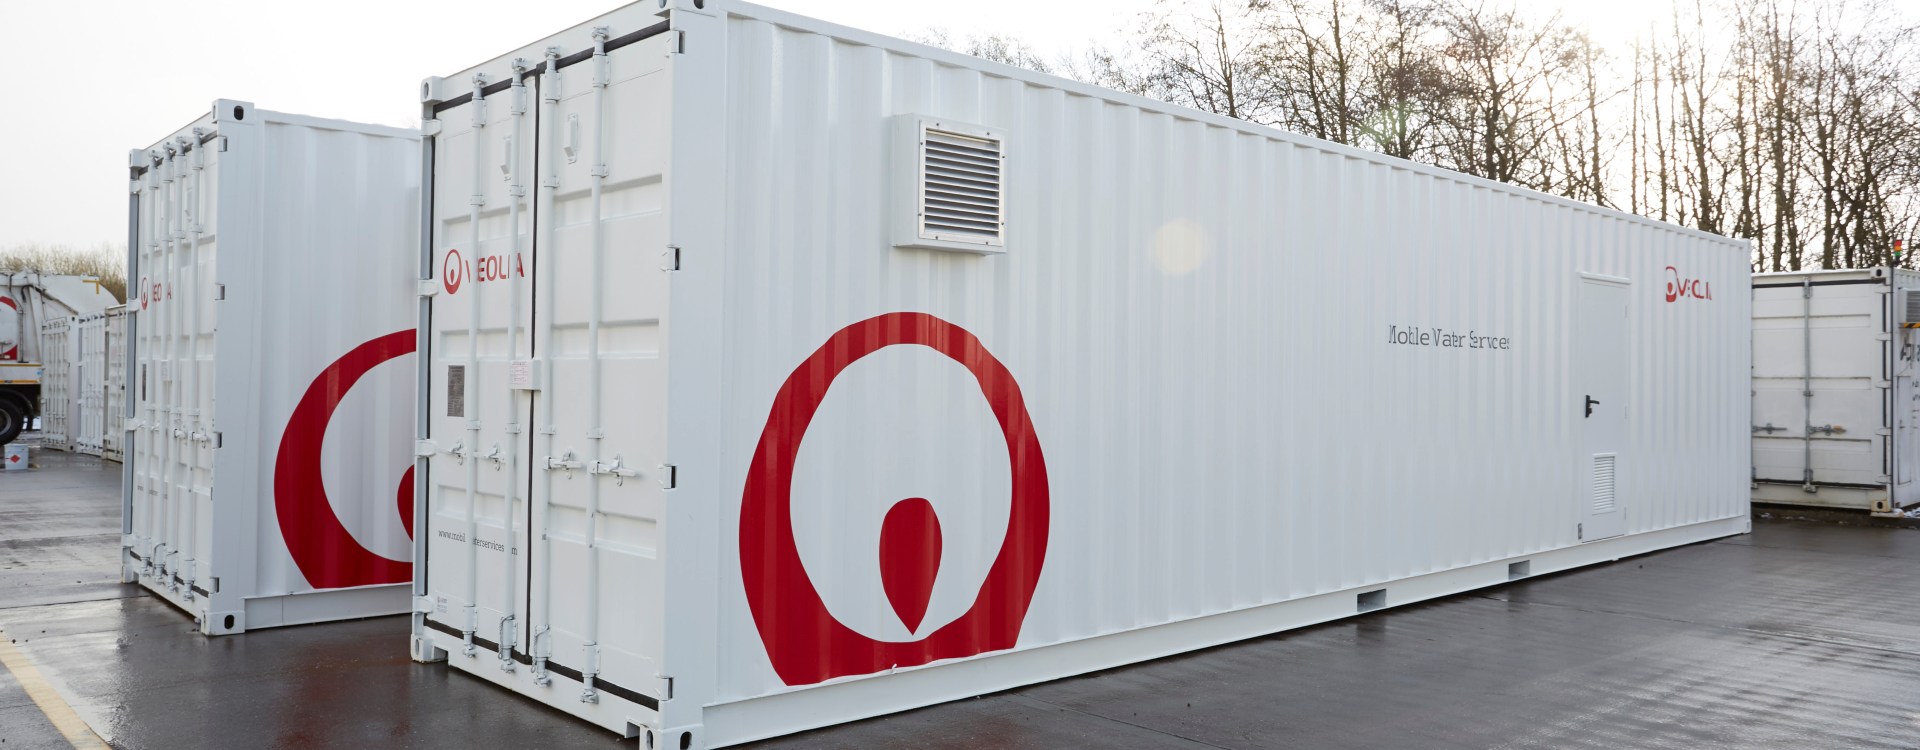 Veolia containers side by side